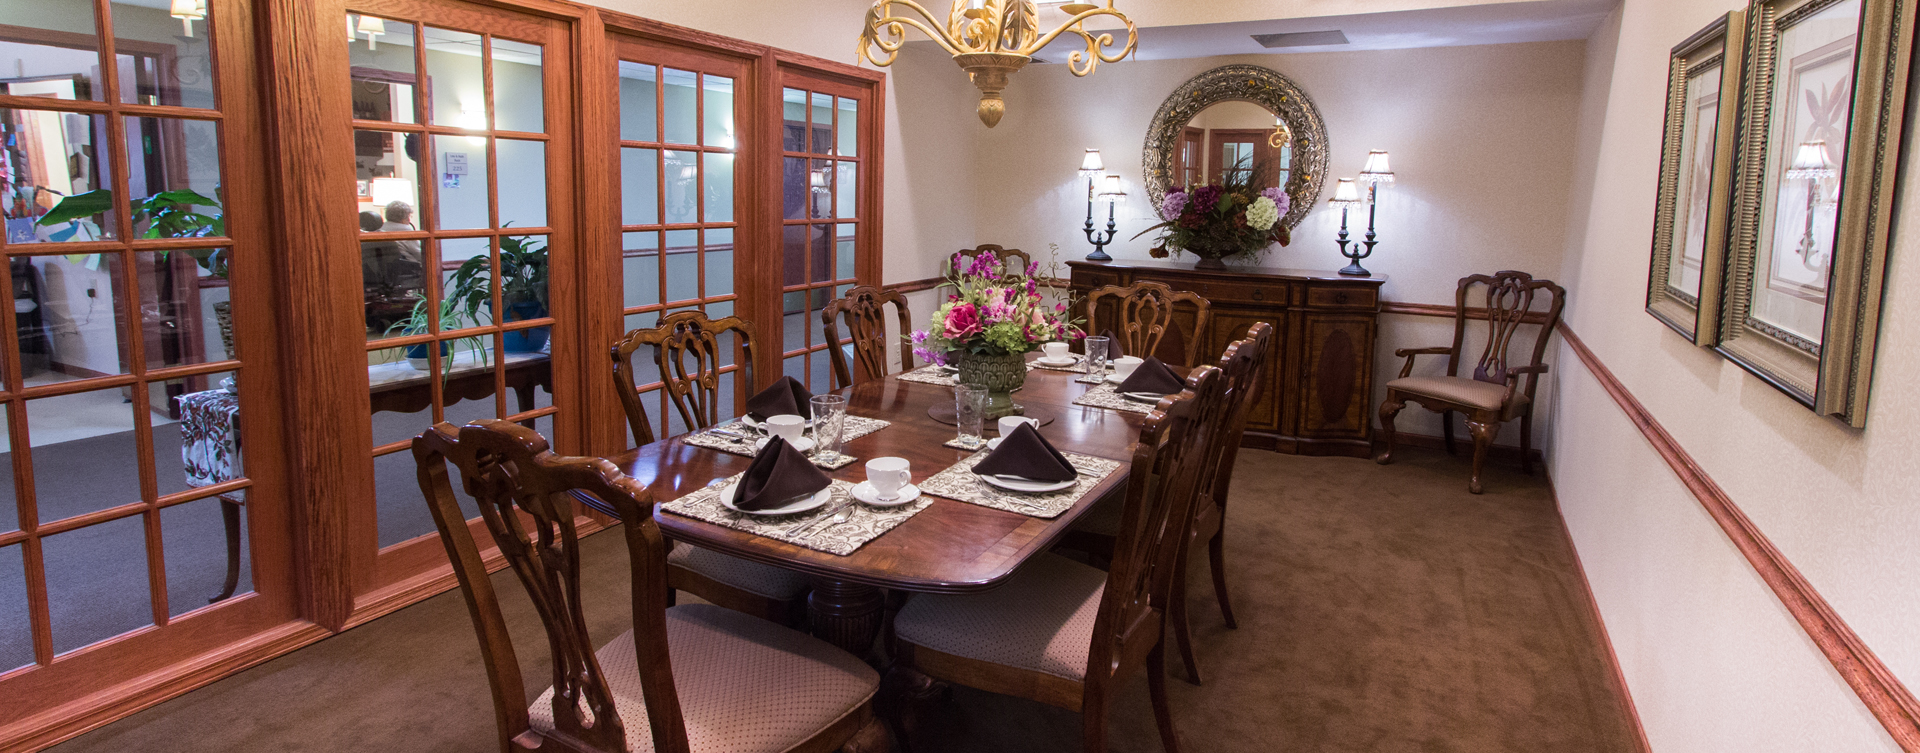 Have fun with themed and holiday meals in the private dining room at Bickford of Bourbonnais